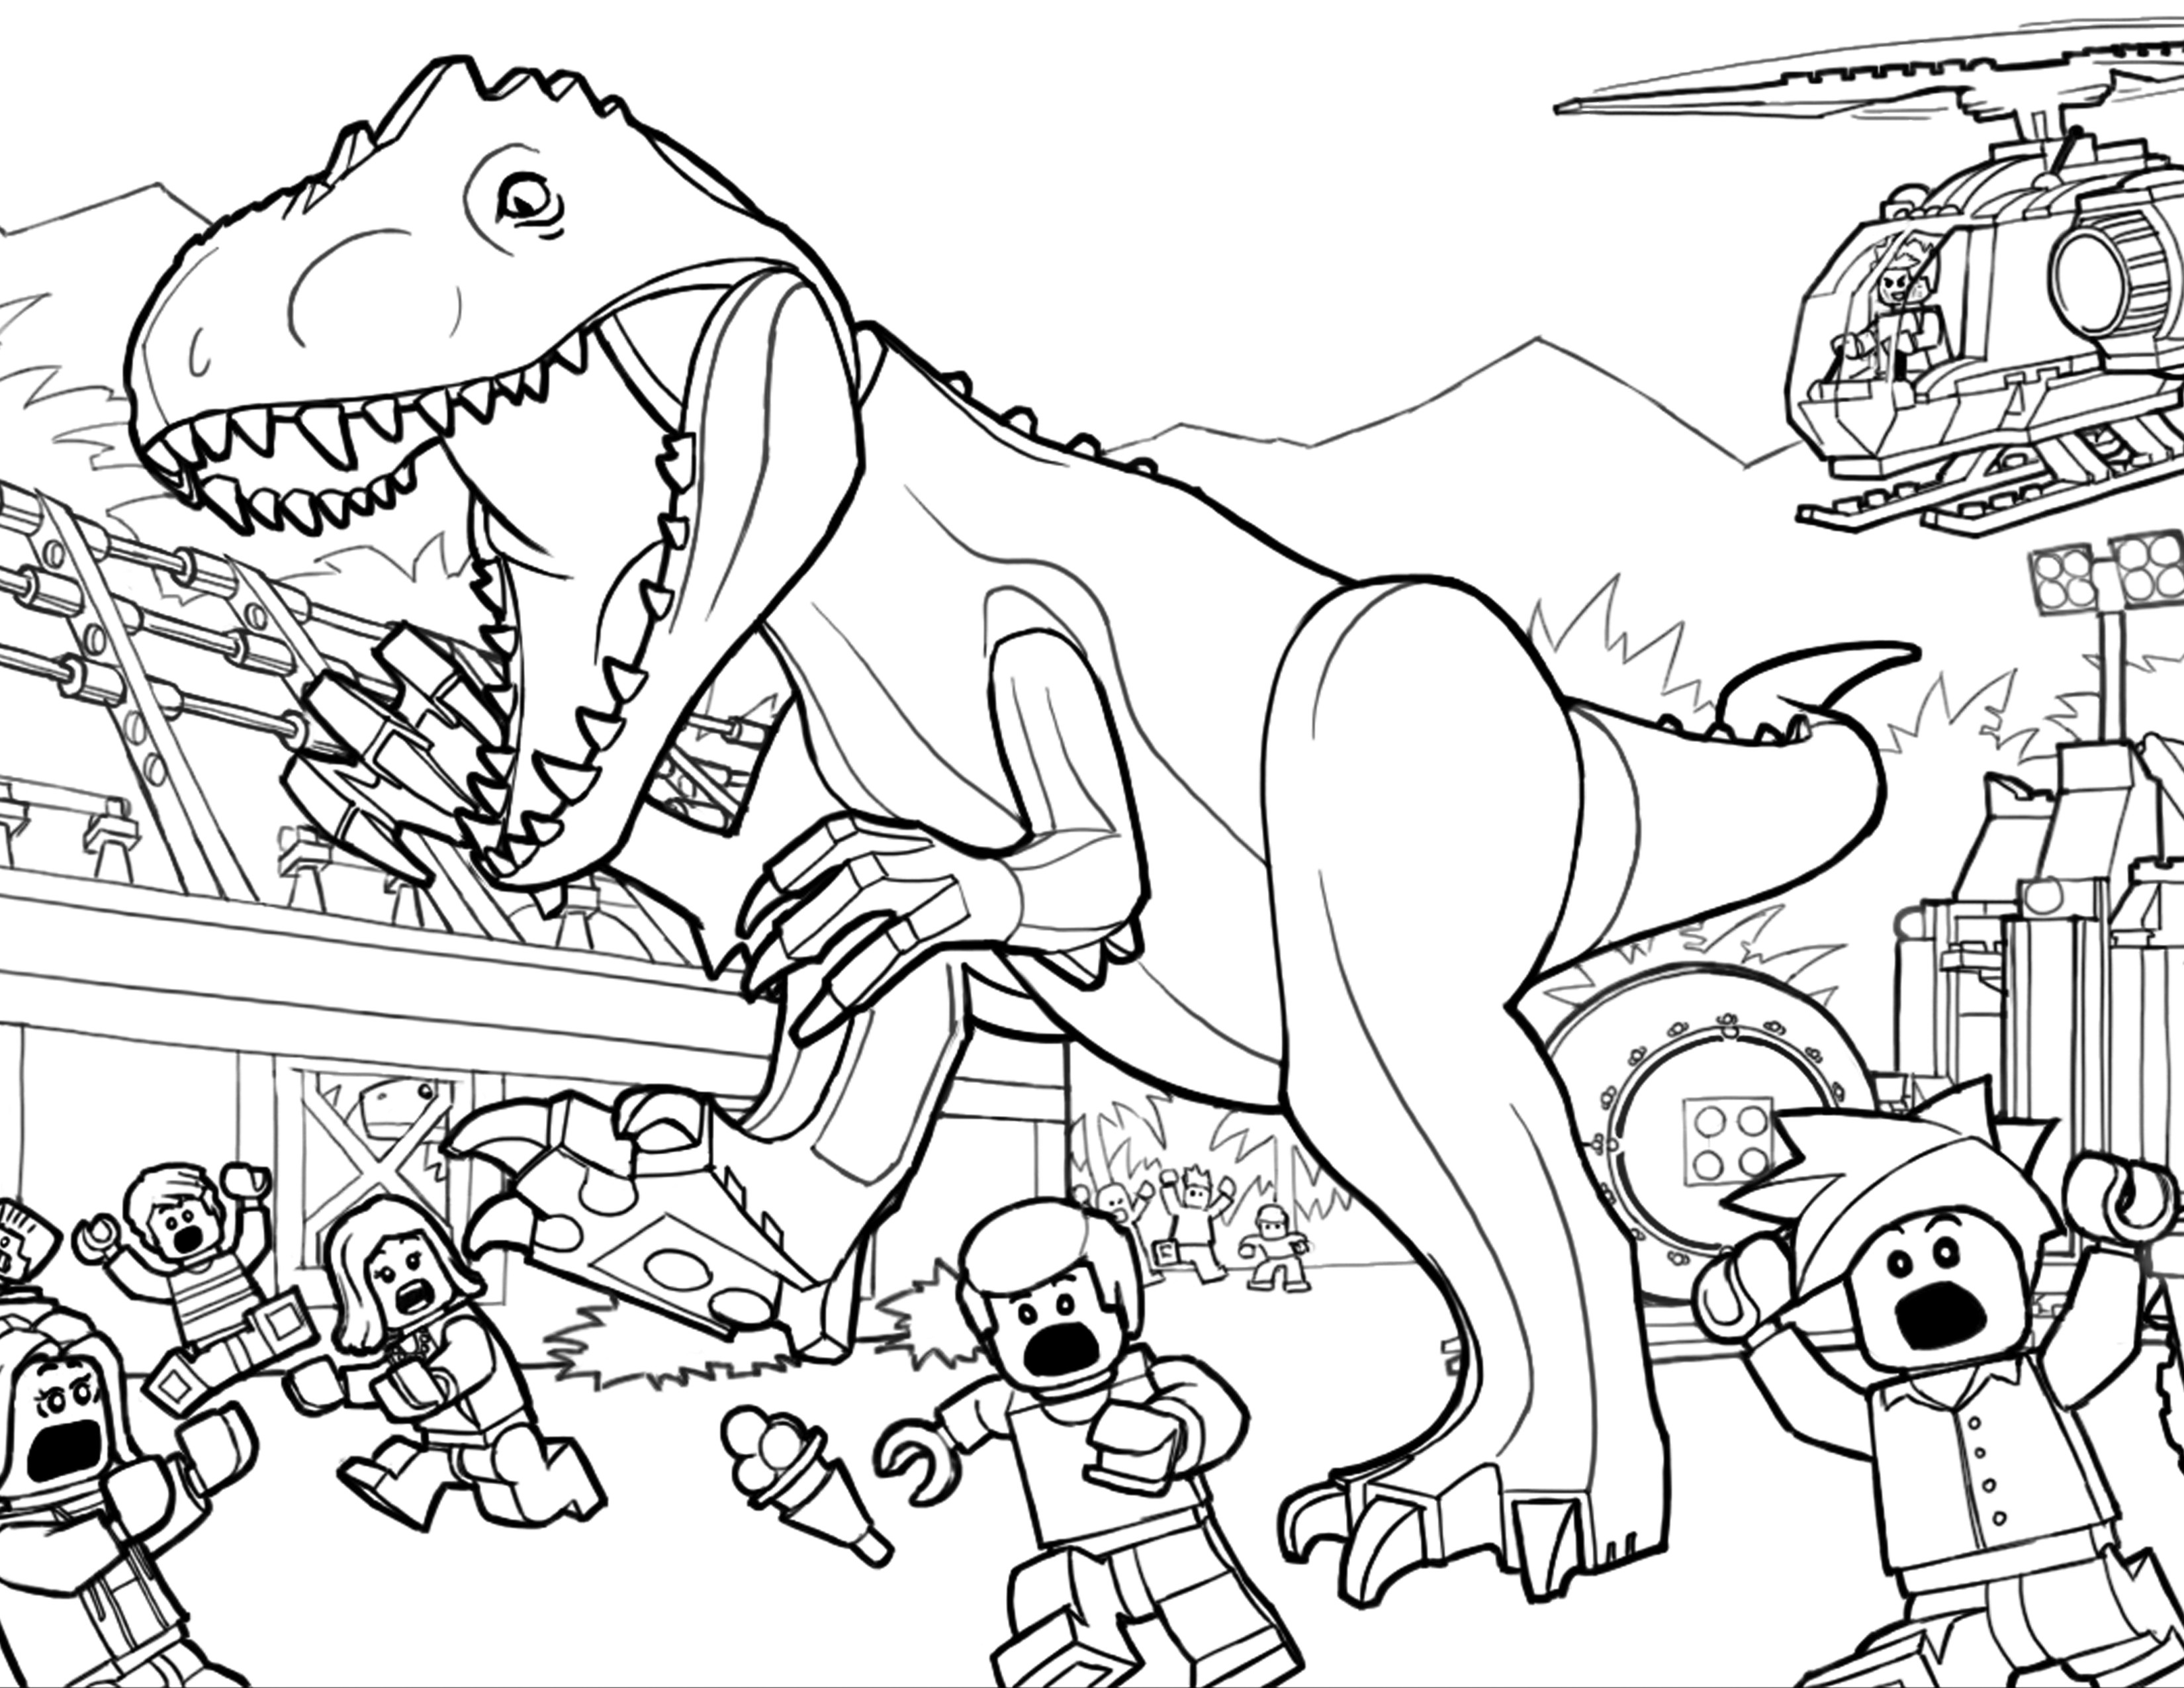 T Rex Printable Coloring Pages
 TRex Coloring Pages Best Coloring Pages For Kids